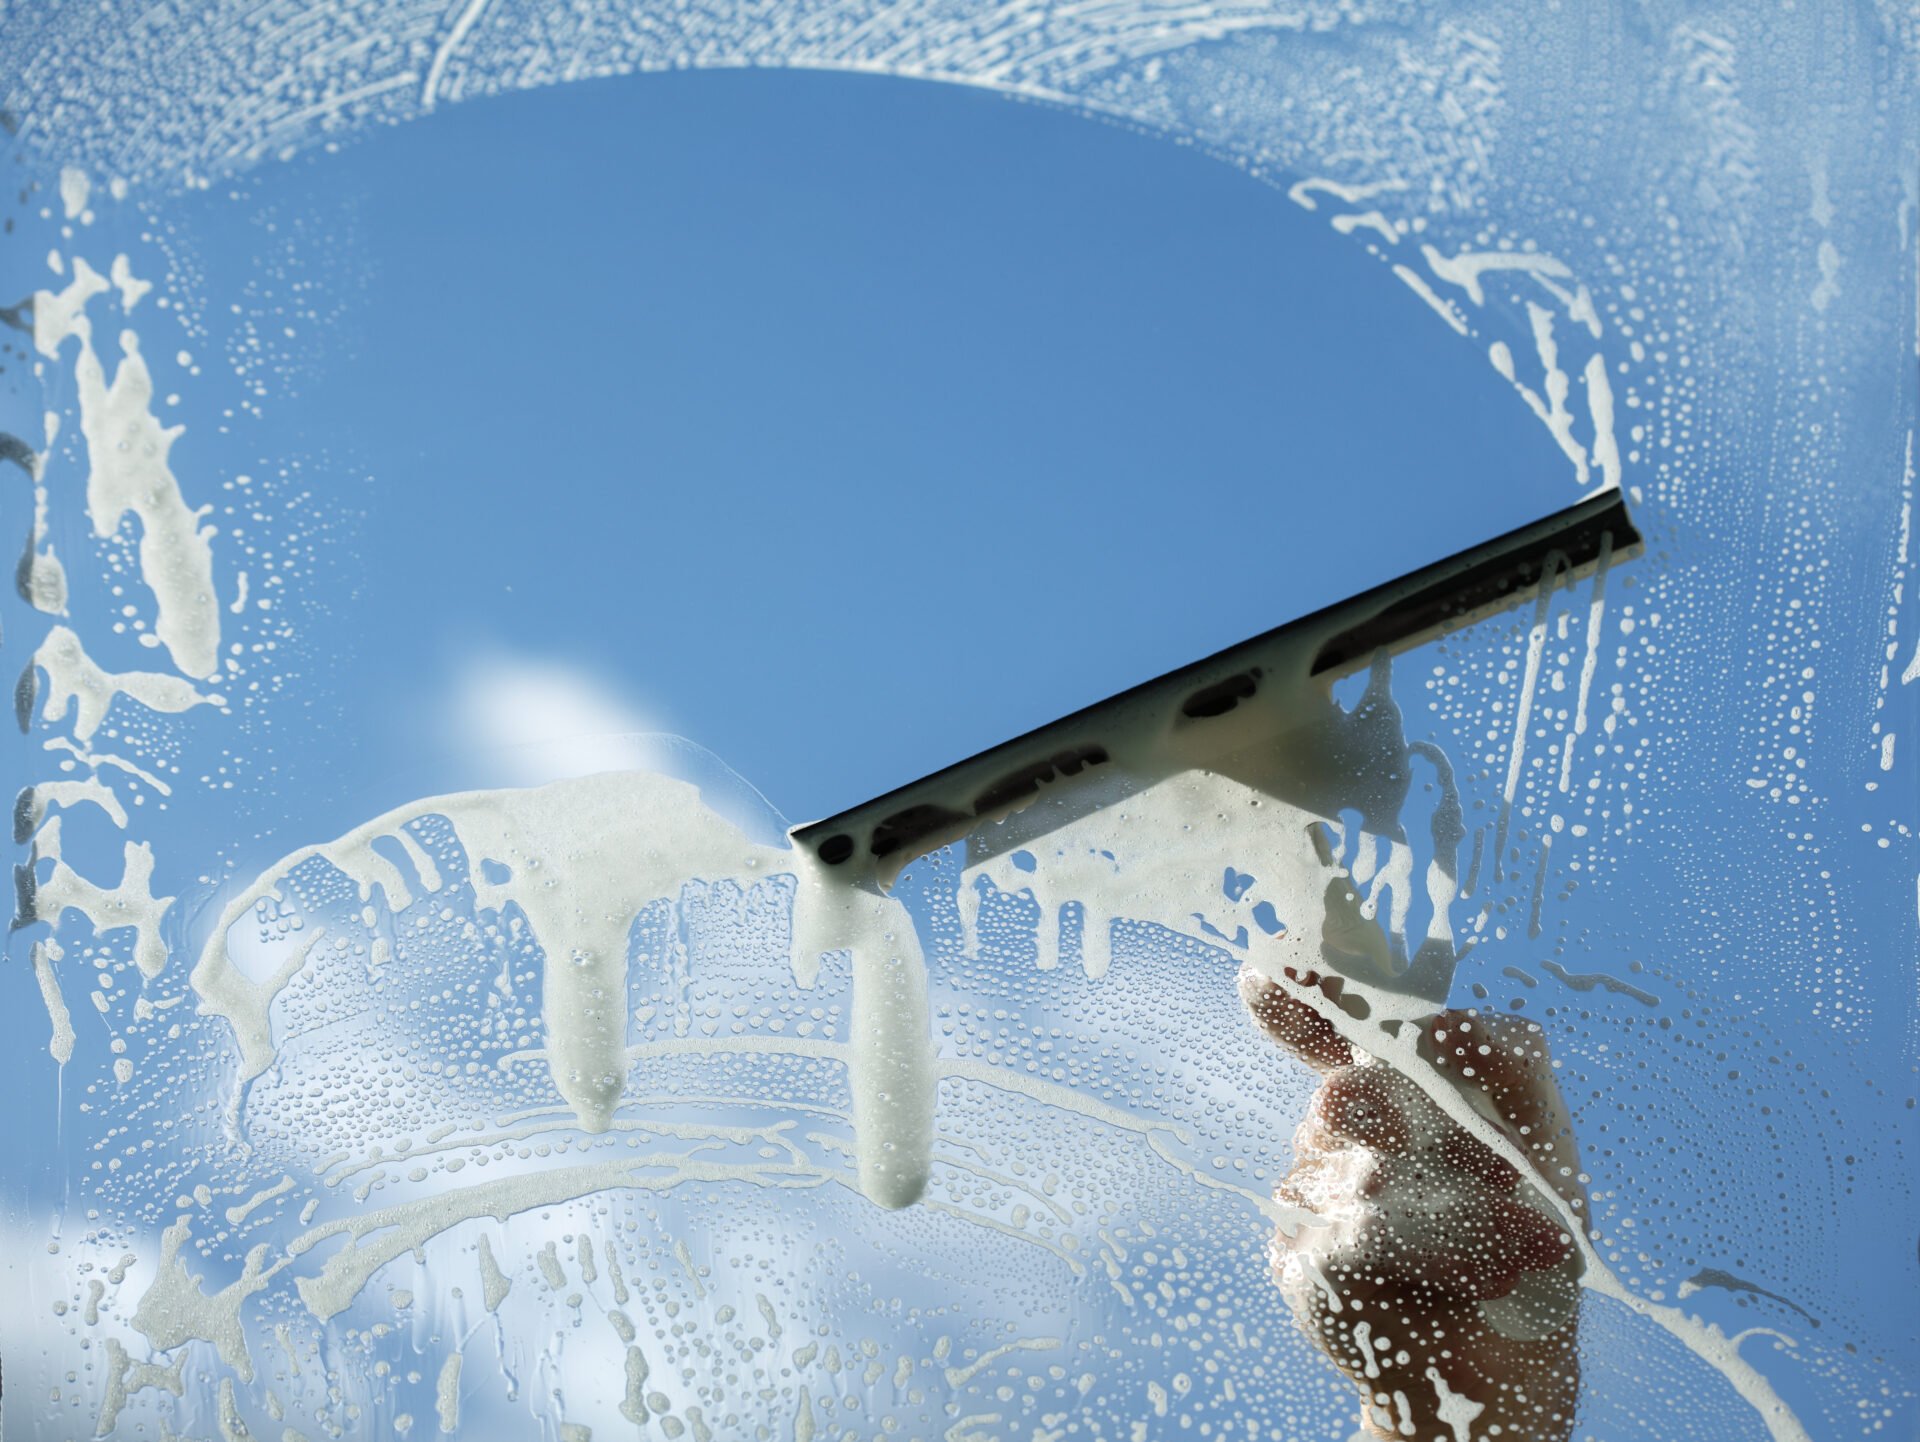 non-toxic Window cleaner using a squeegee to wash a window